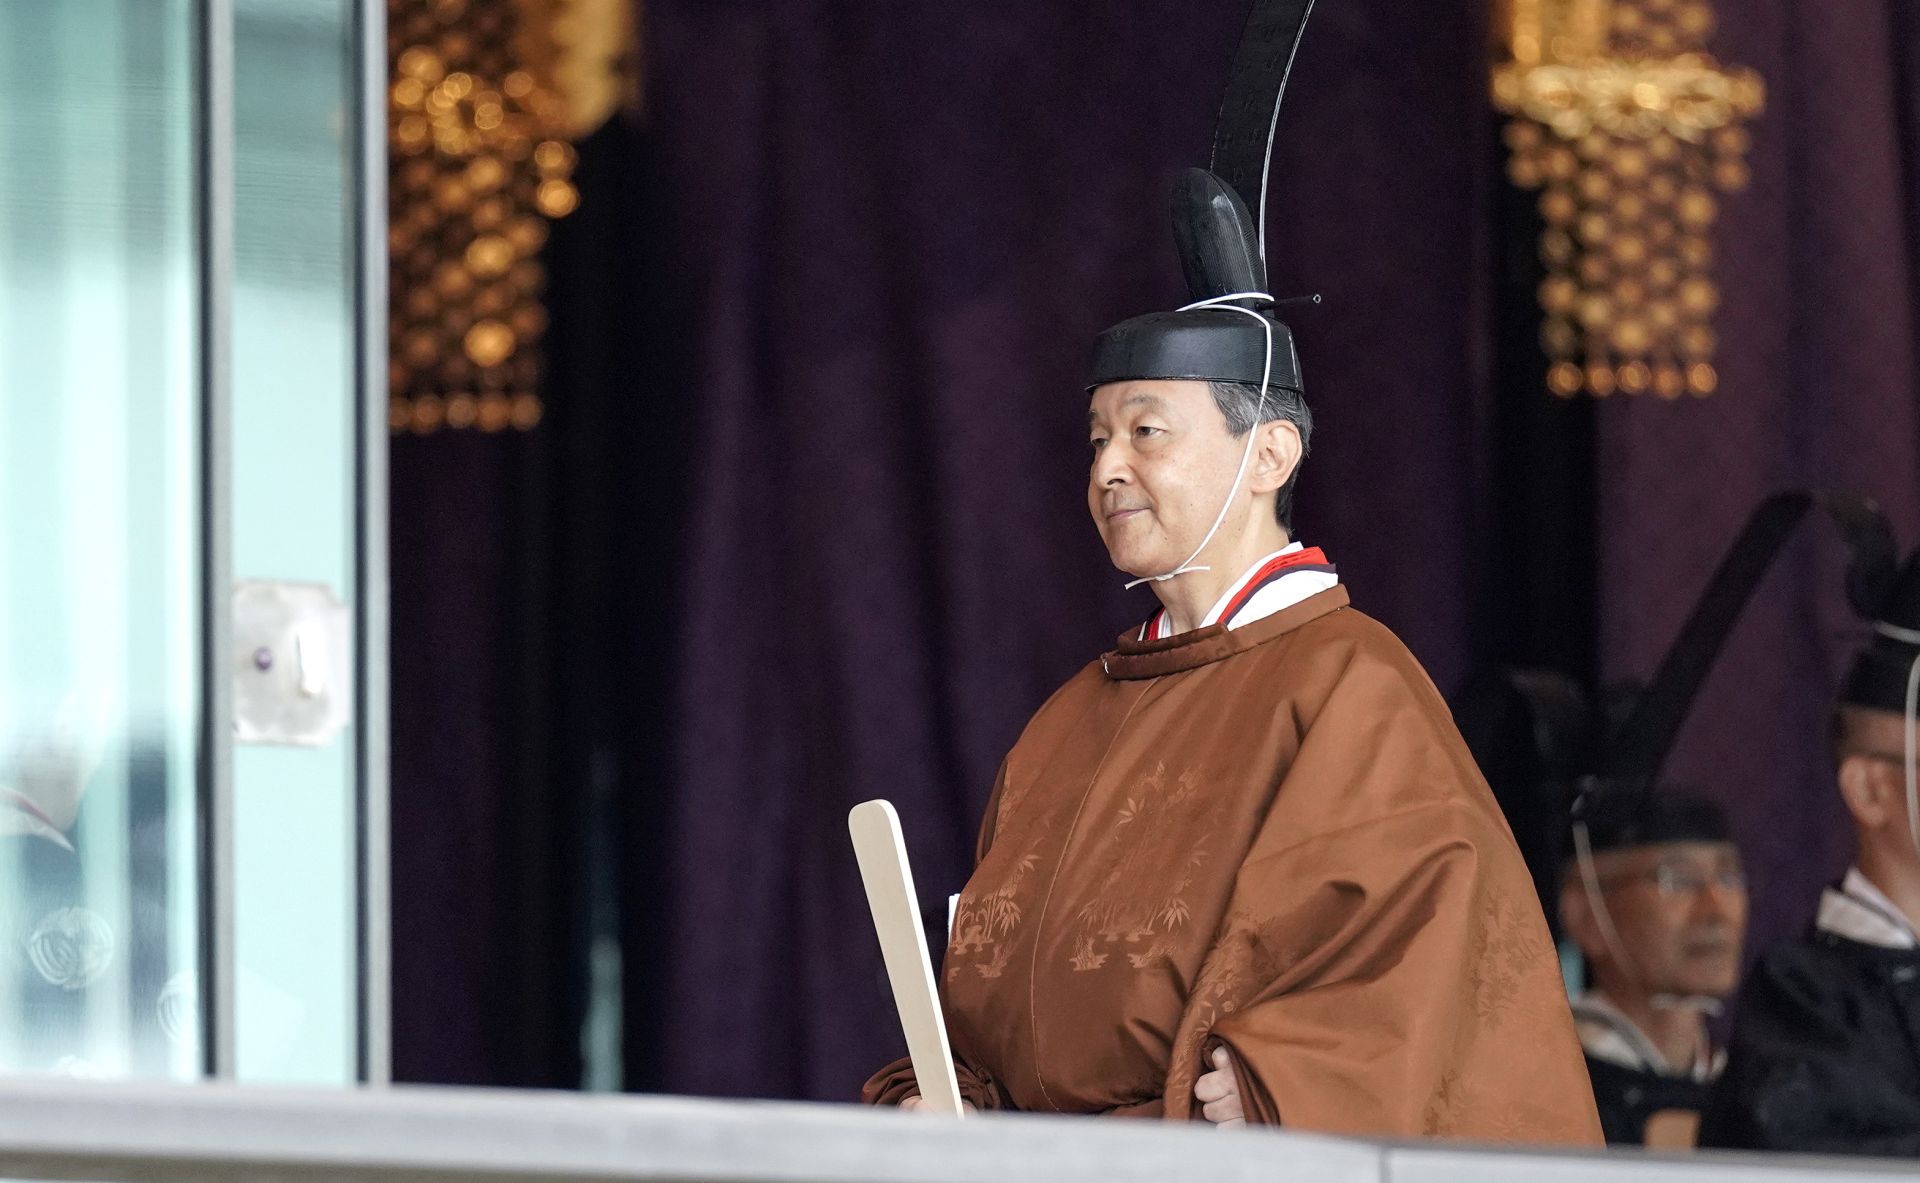 epa07939632 Japan's Emperor Naruhito leaves the ceremony hall after proclaiming his enthronement at the Imperial Palace in Tokyo, Japan, 22 October 2019. Naruhito ascended the throne on 01 May 2019 after his father Emperor Emeritus Akihito abdicated on 30 April 2019.  EPA/KIMIMASA MAYAMA / POOL